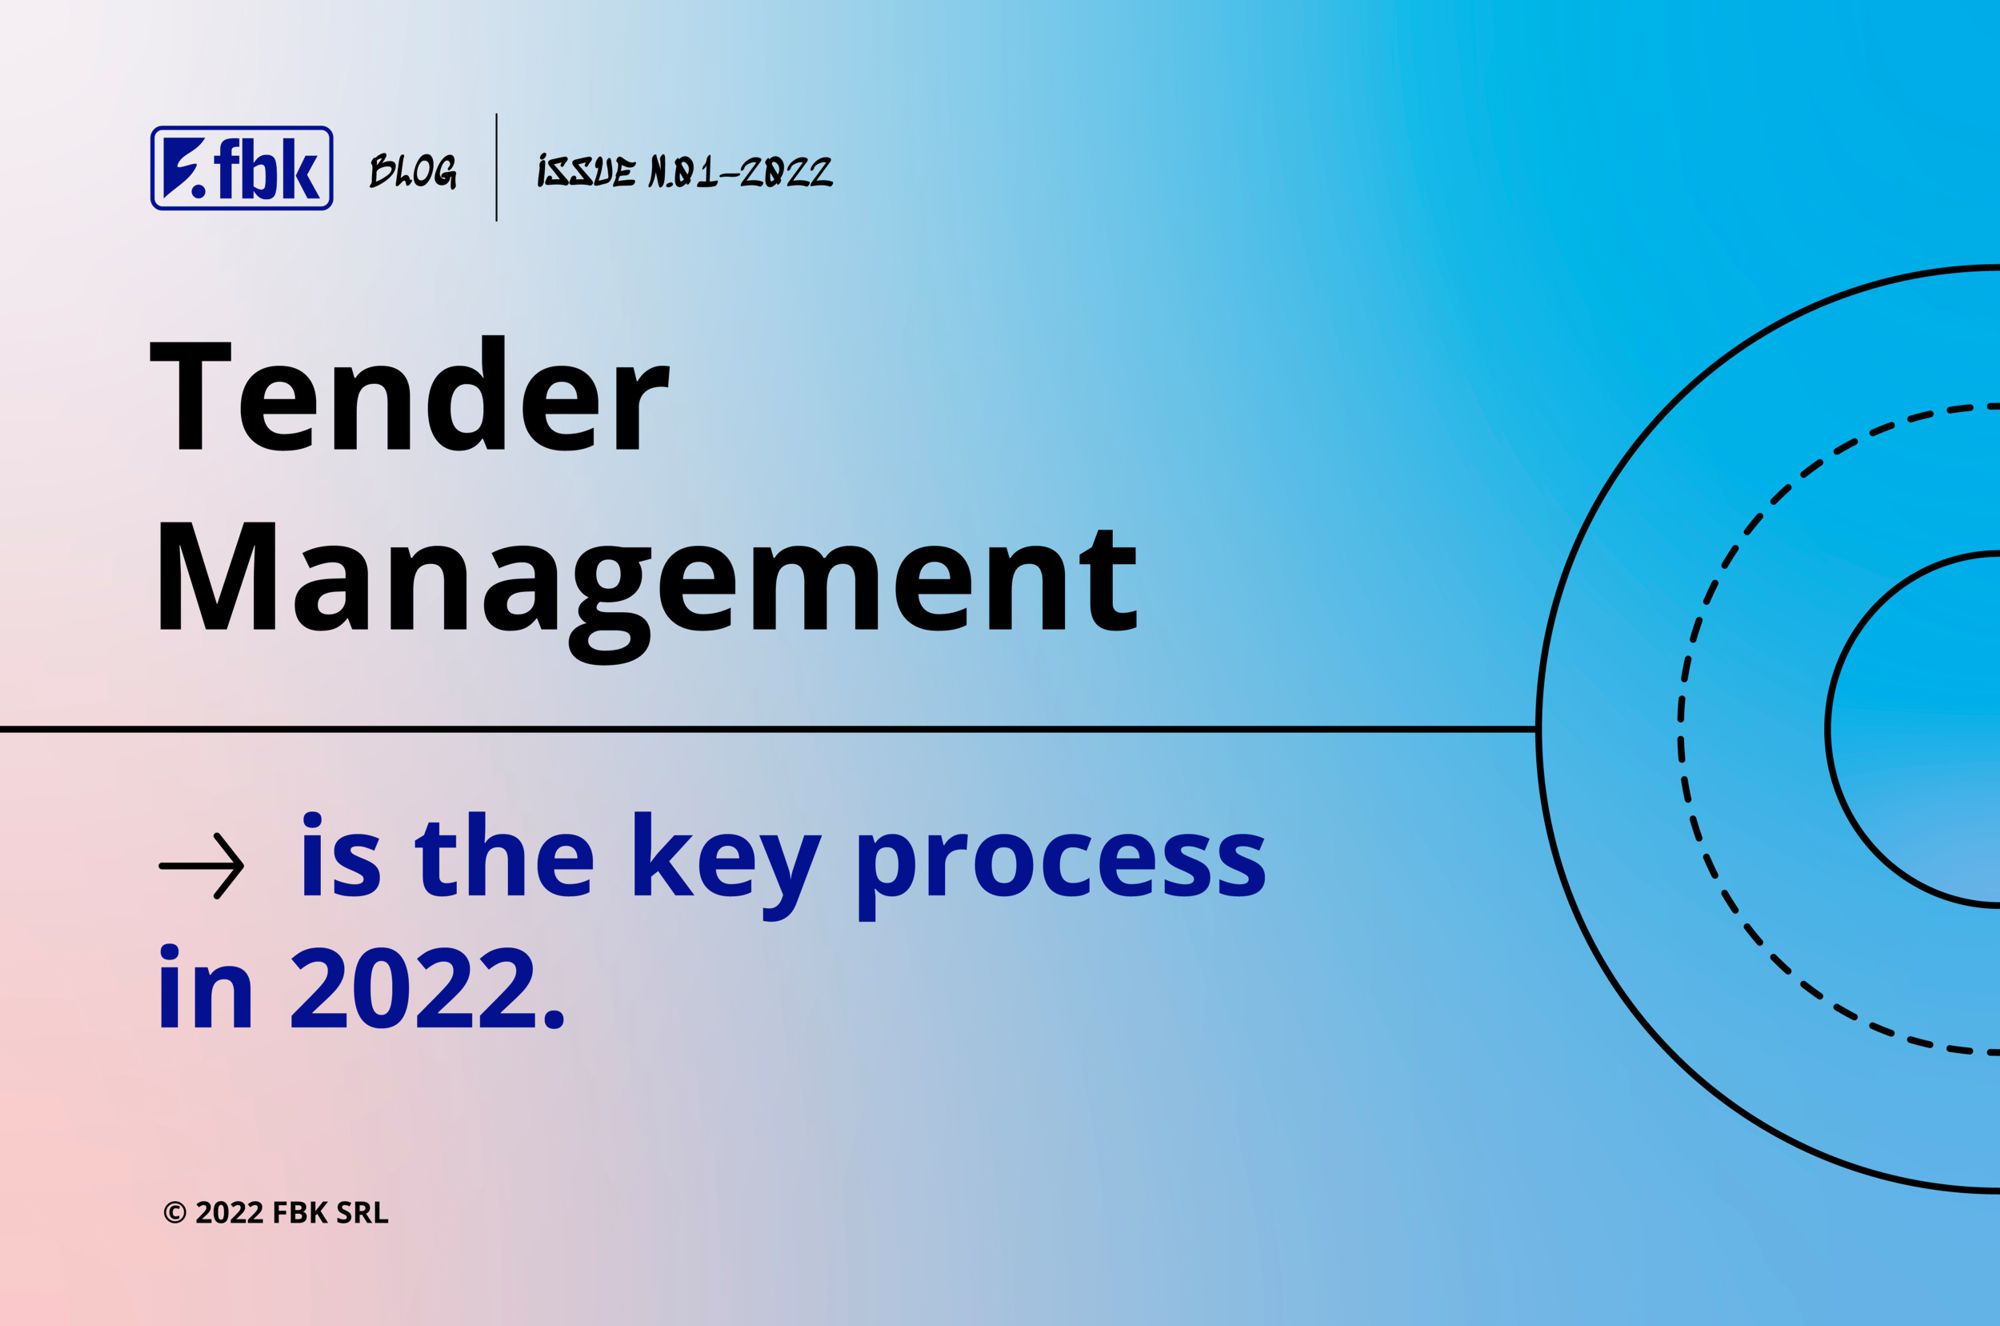 Why Tender Management is the Key Process in 2022